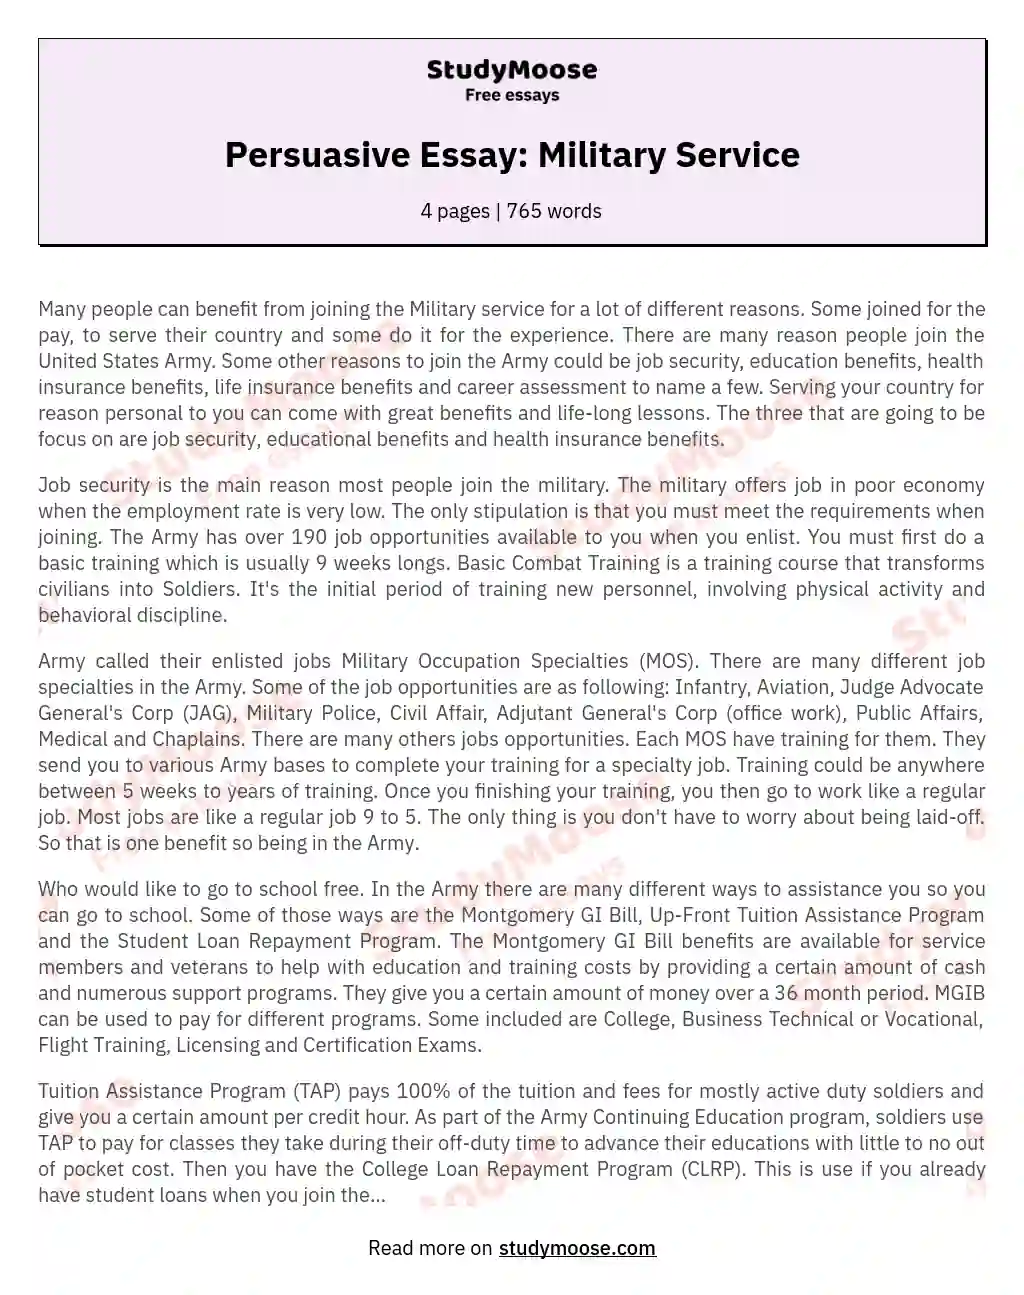 military services essay